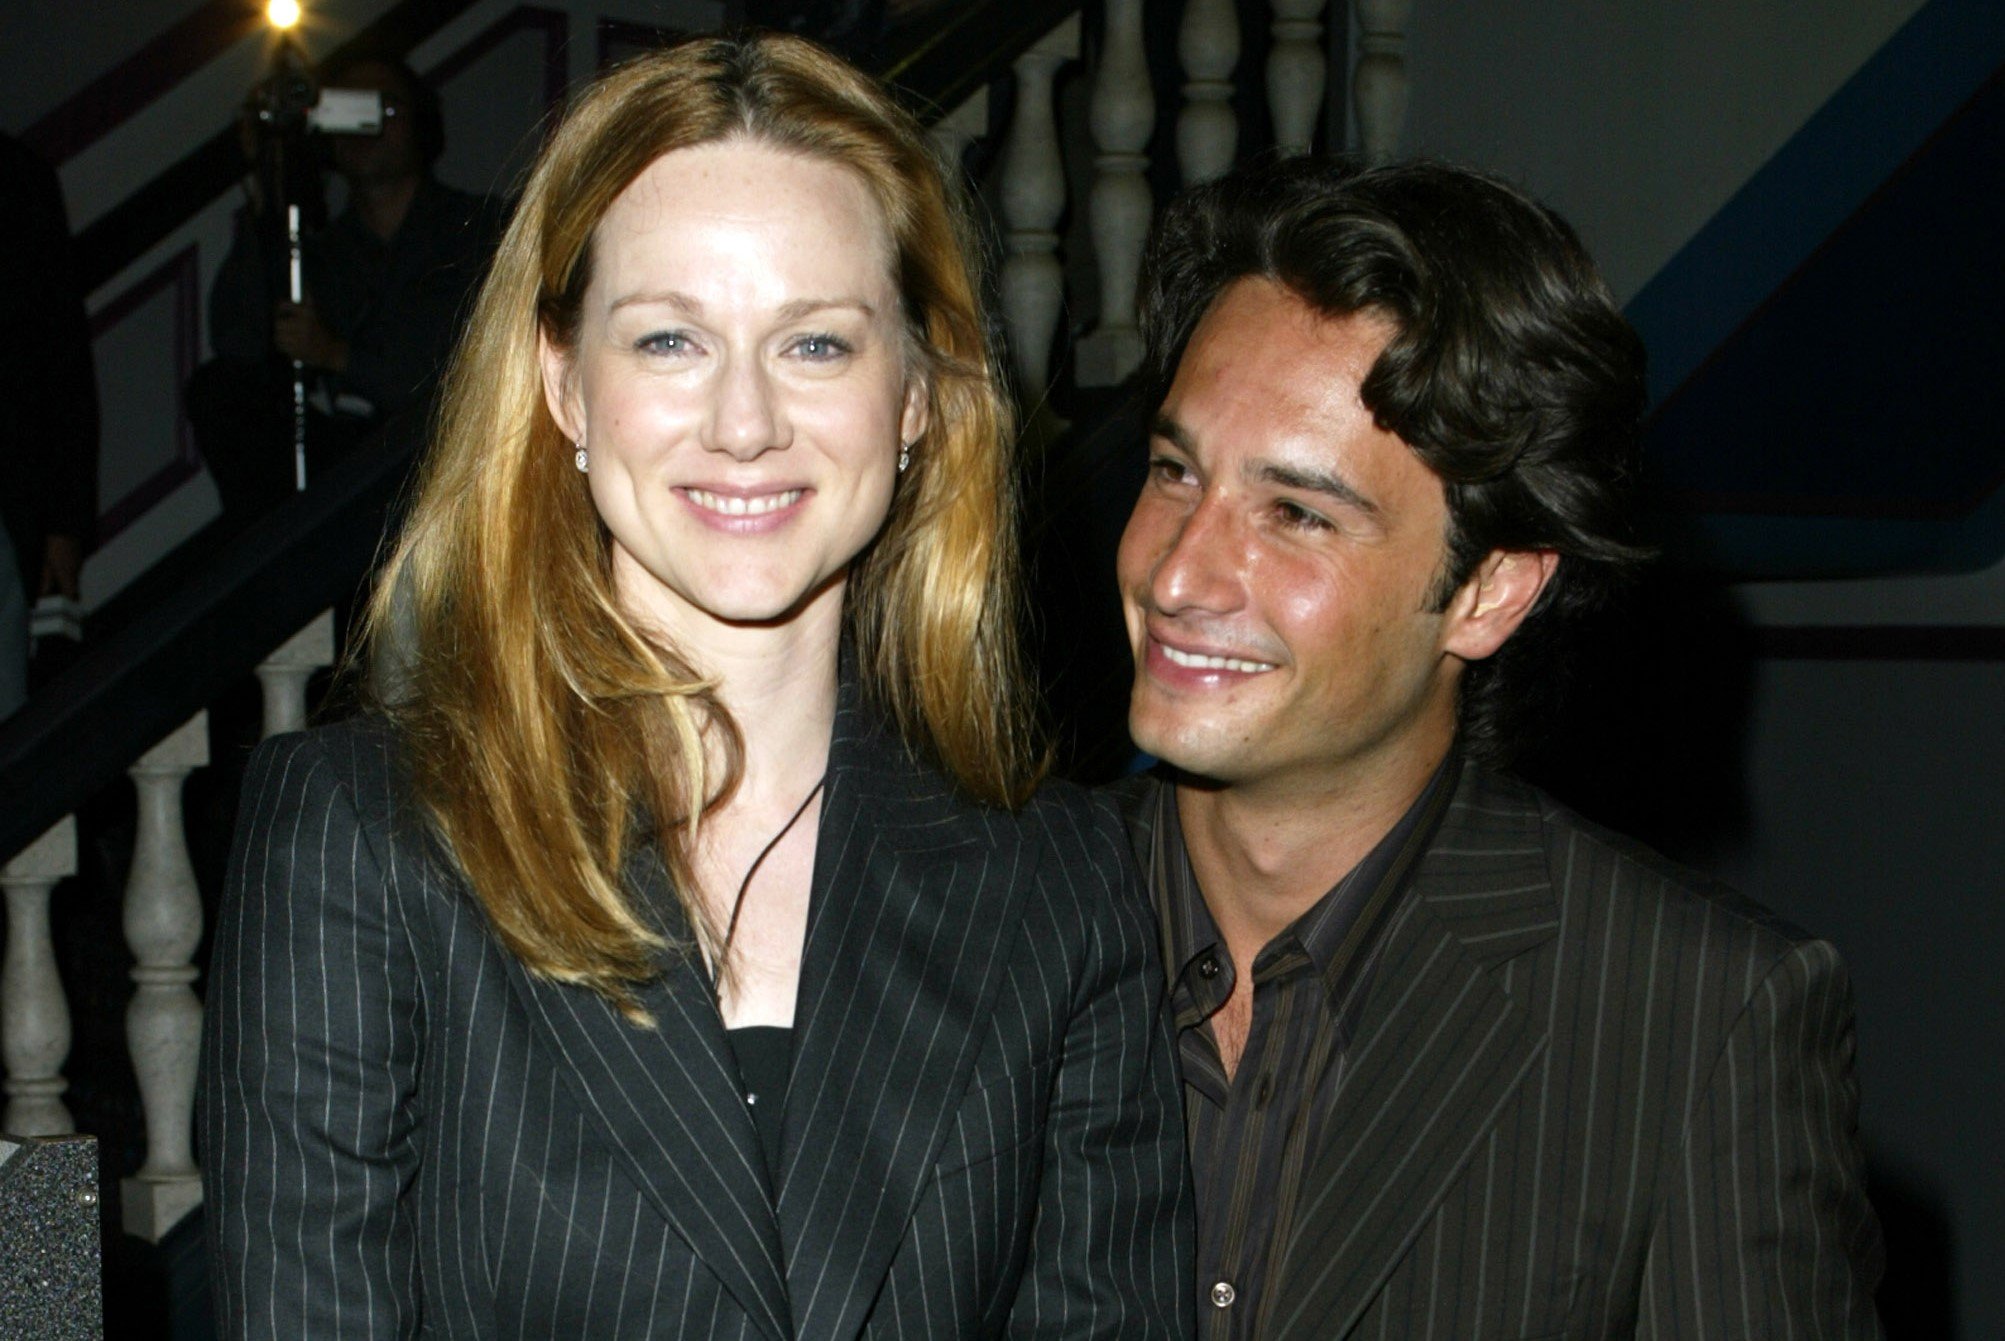 Laura Linney, who appeared in the 'Love Actually' sequel, poses for pictures with and Rodrigo Santoro